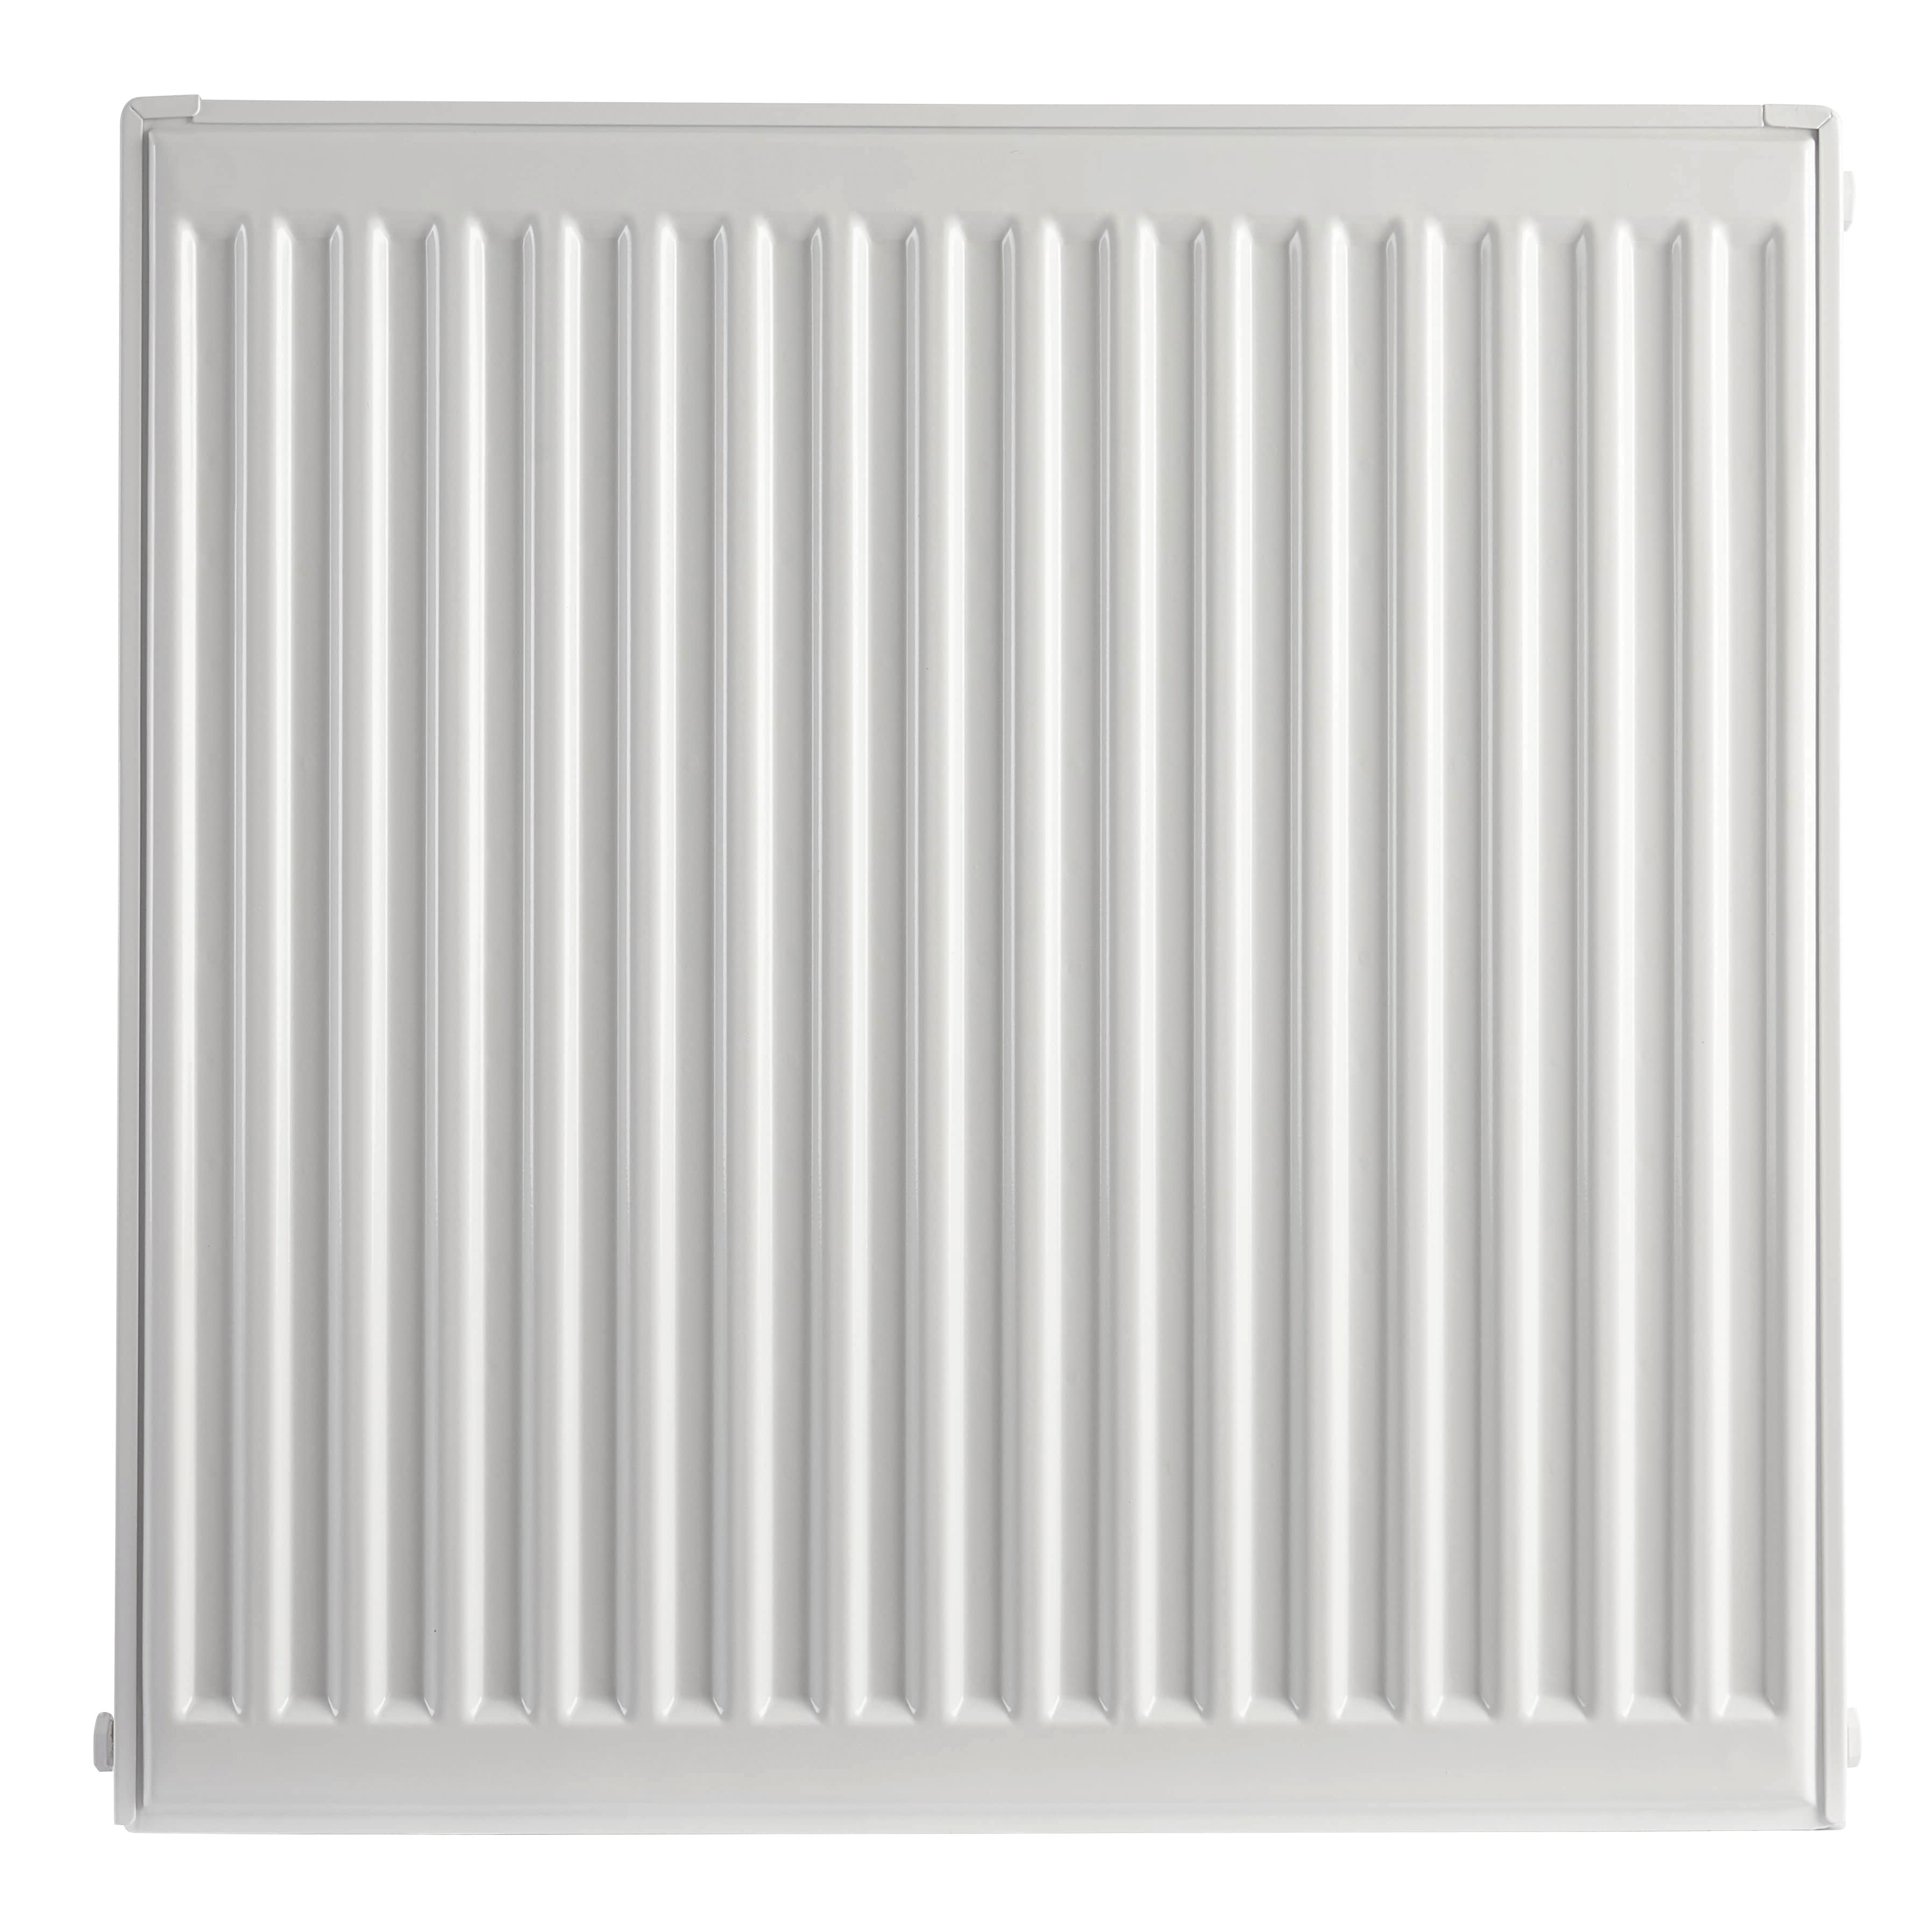 Image of Homeline by Stelrad 600 x 400mm Type 21 Double Panel Plus Single Convector Radiator